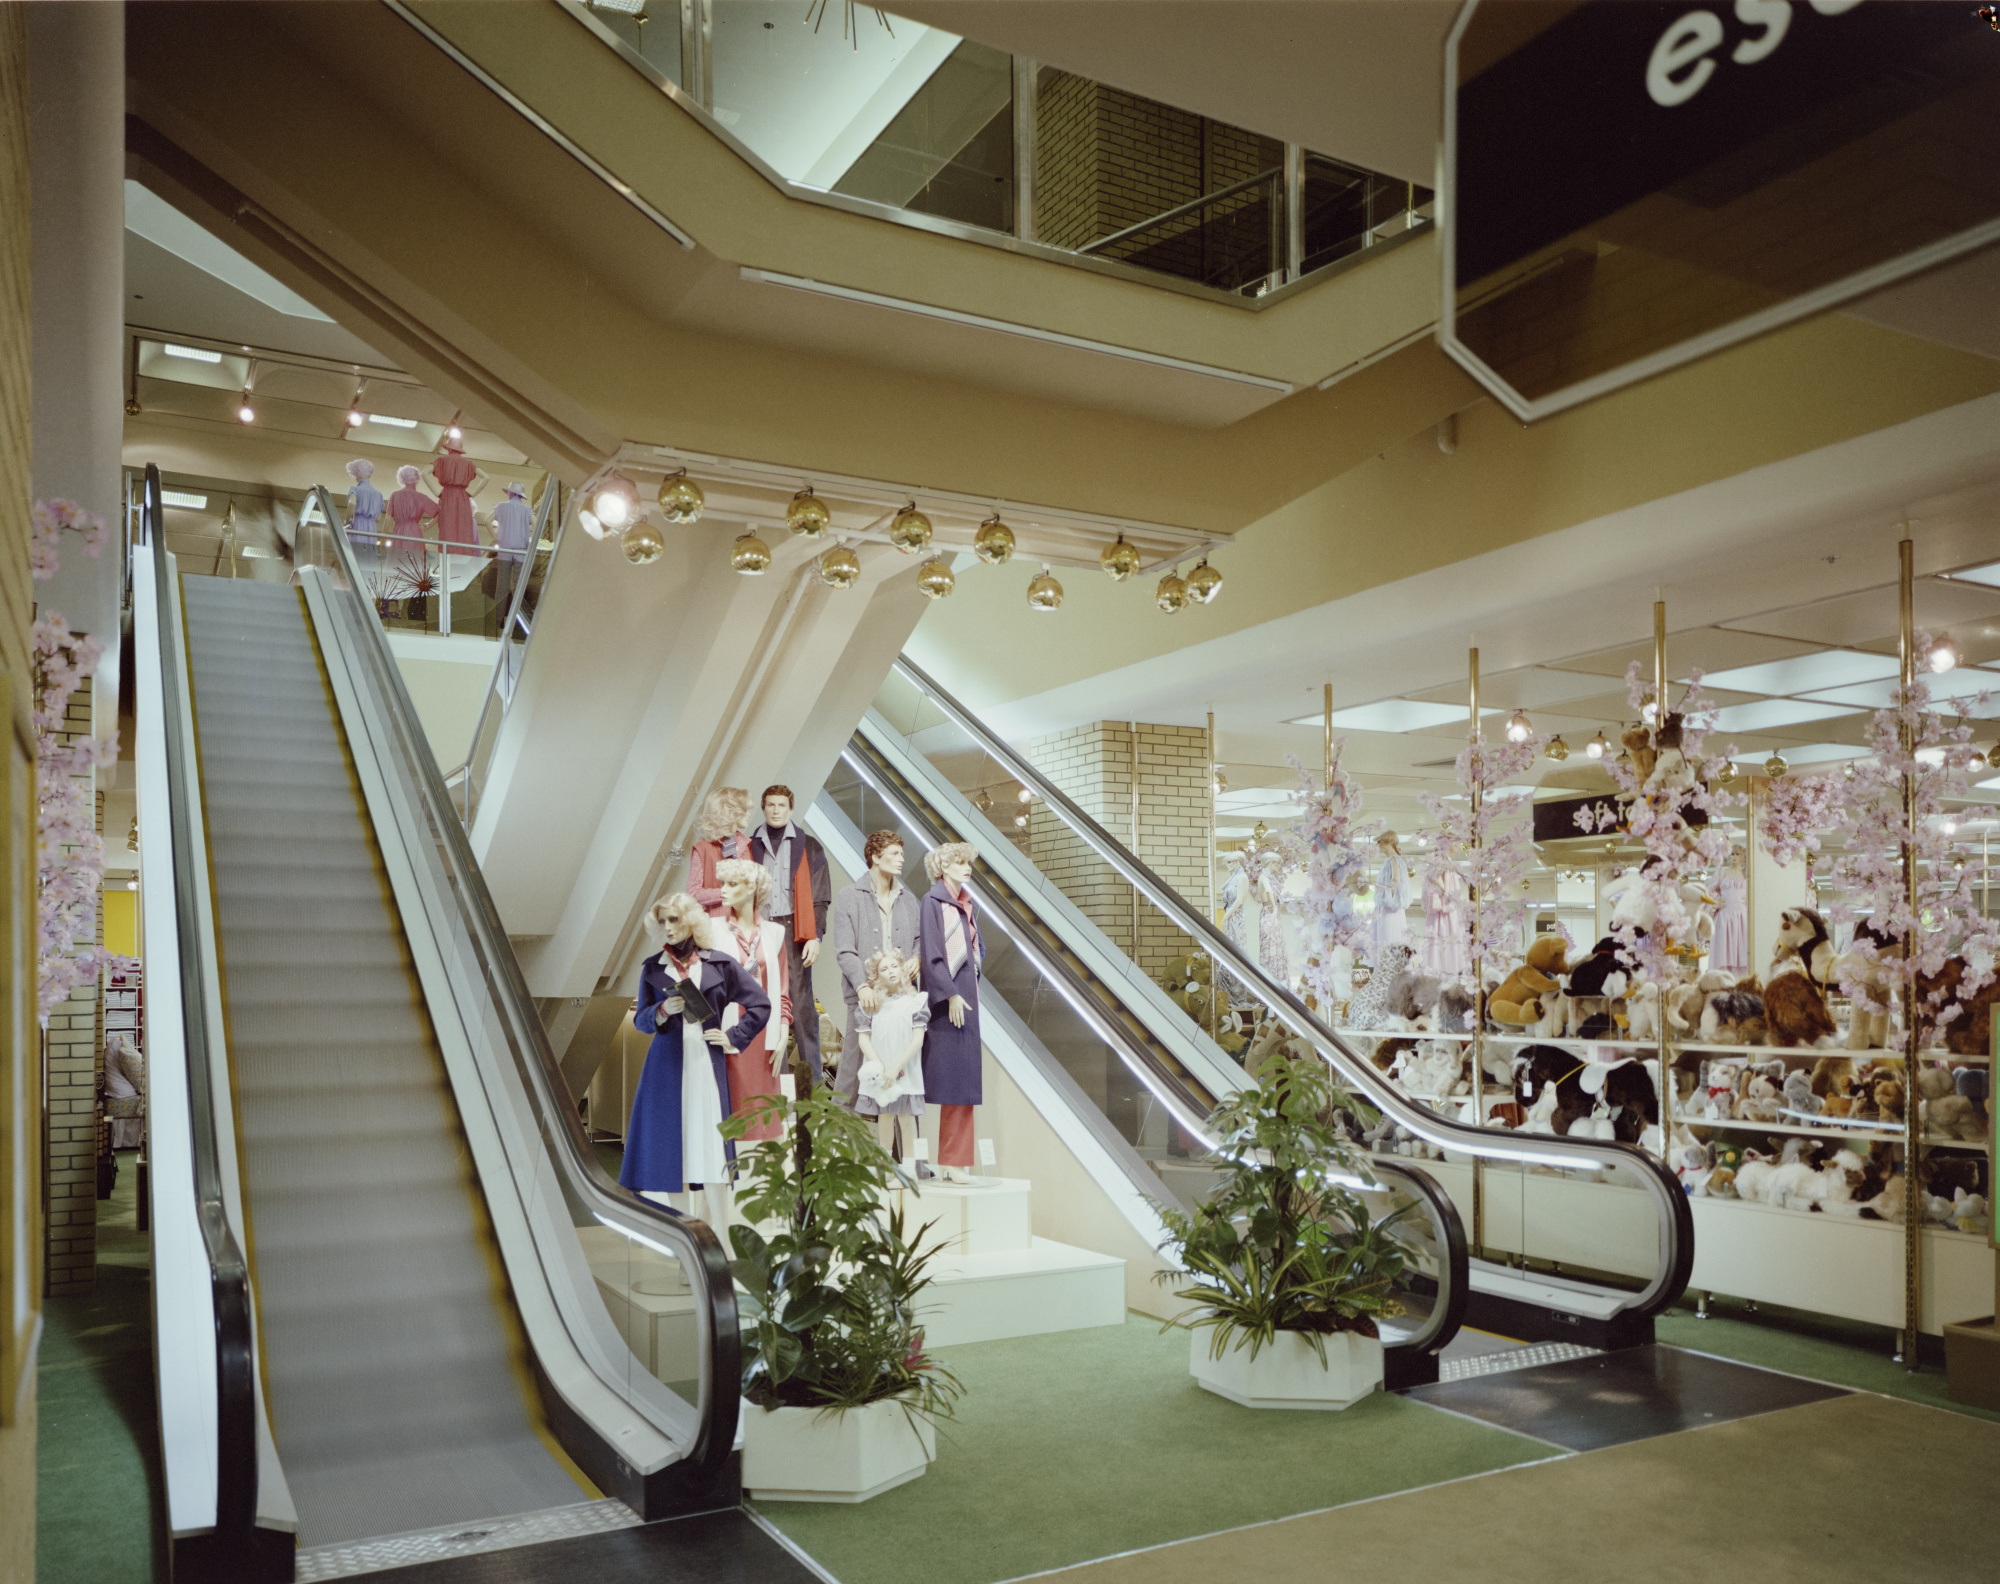 Colour photograph showing the interior of the D H Evans store at Wood Green Shopping City. Between the two escalators there are a group of mannequins and two large plants.